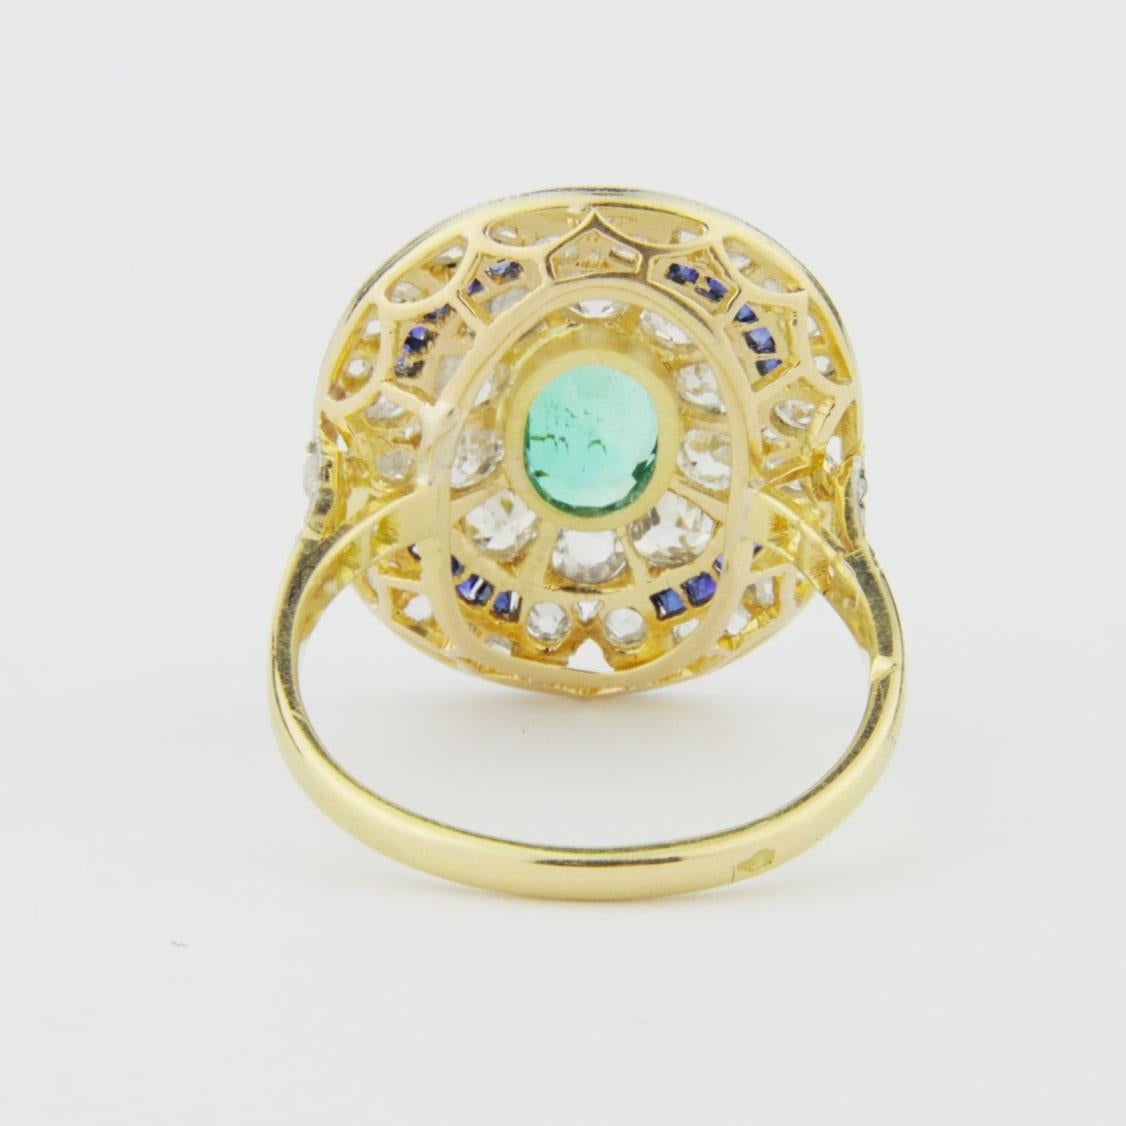 Women's French Art Deco Cocktail Ring with an Emerald, Diamonds and Sapphires